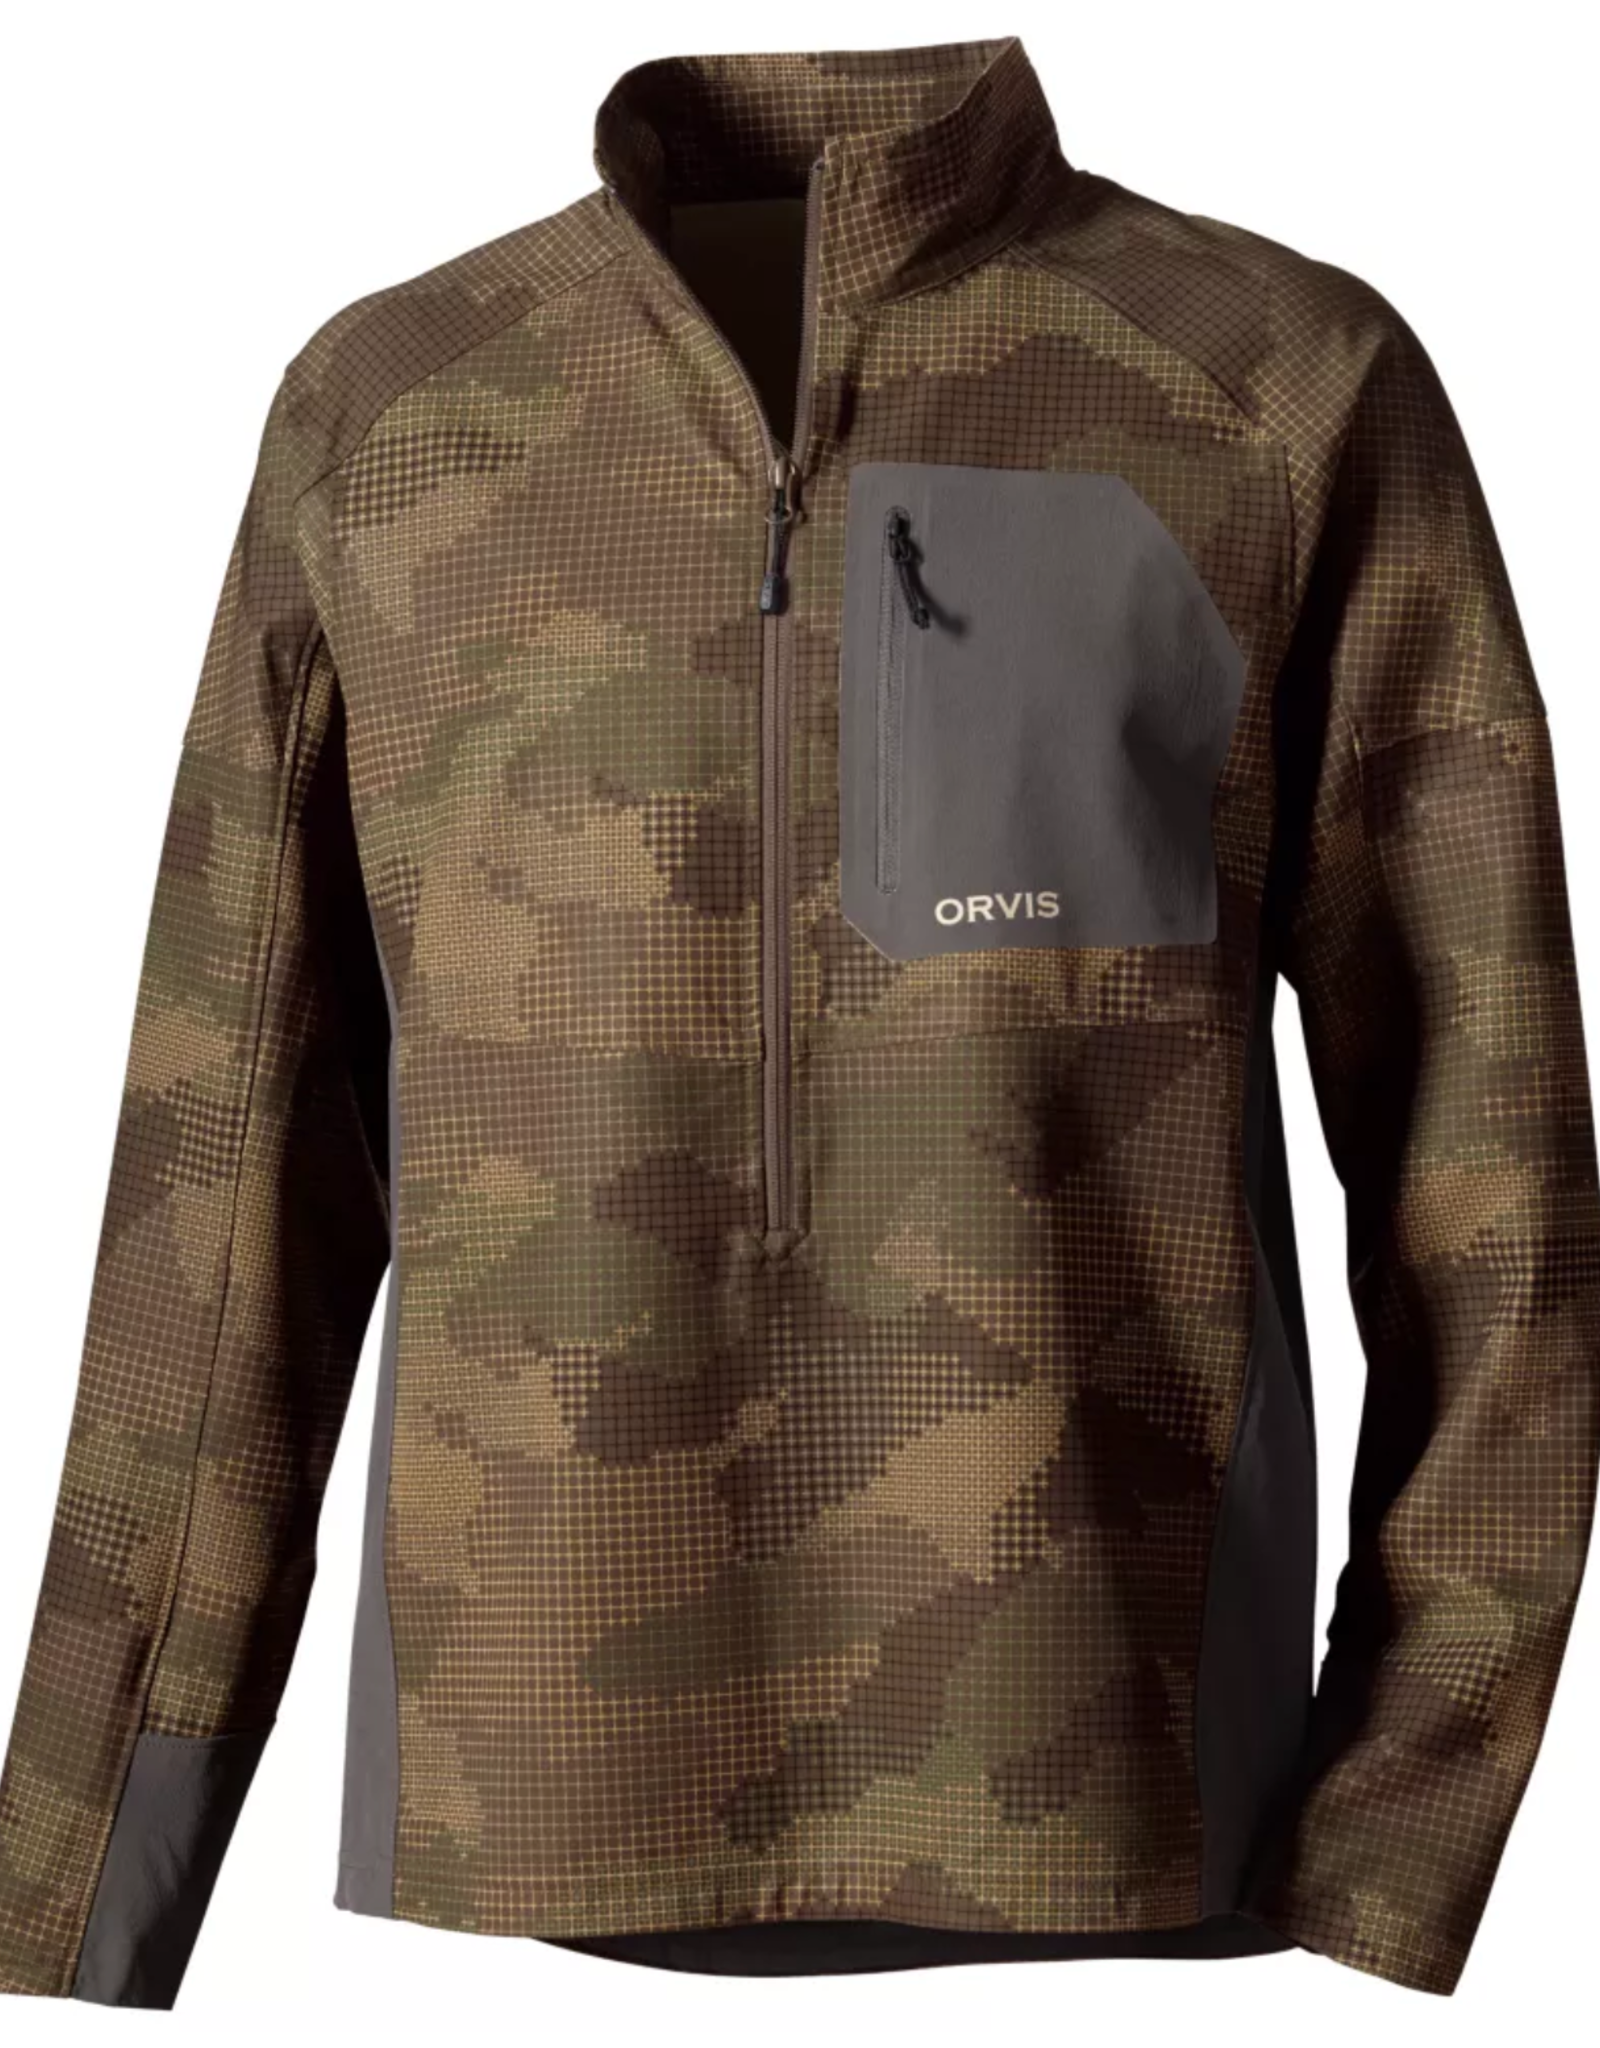 Orvis Orvis Pro LT Softshell Pullover - Camouflage